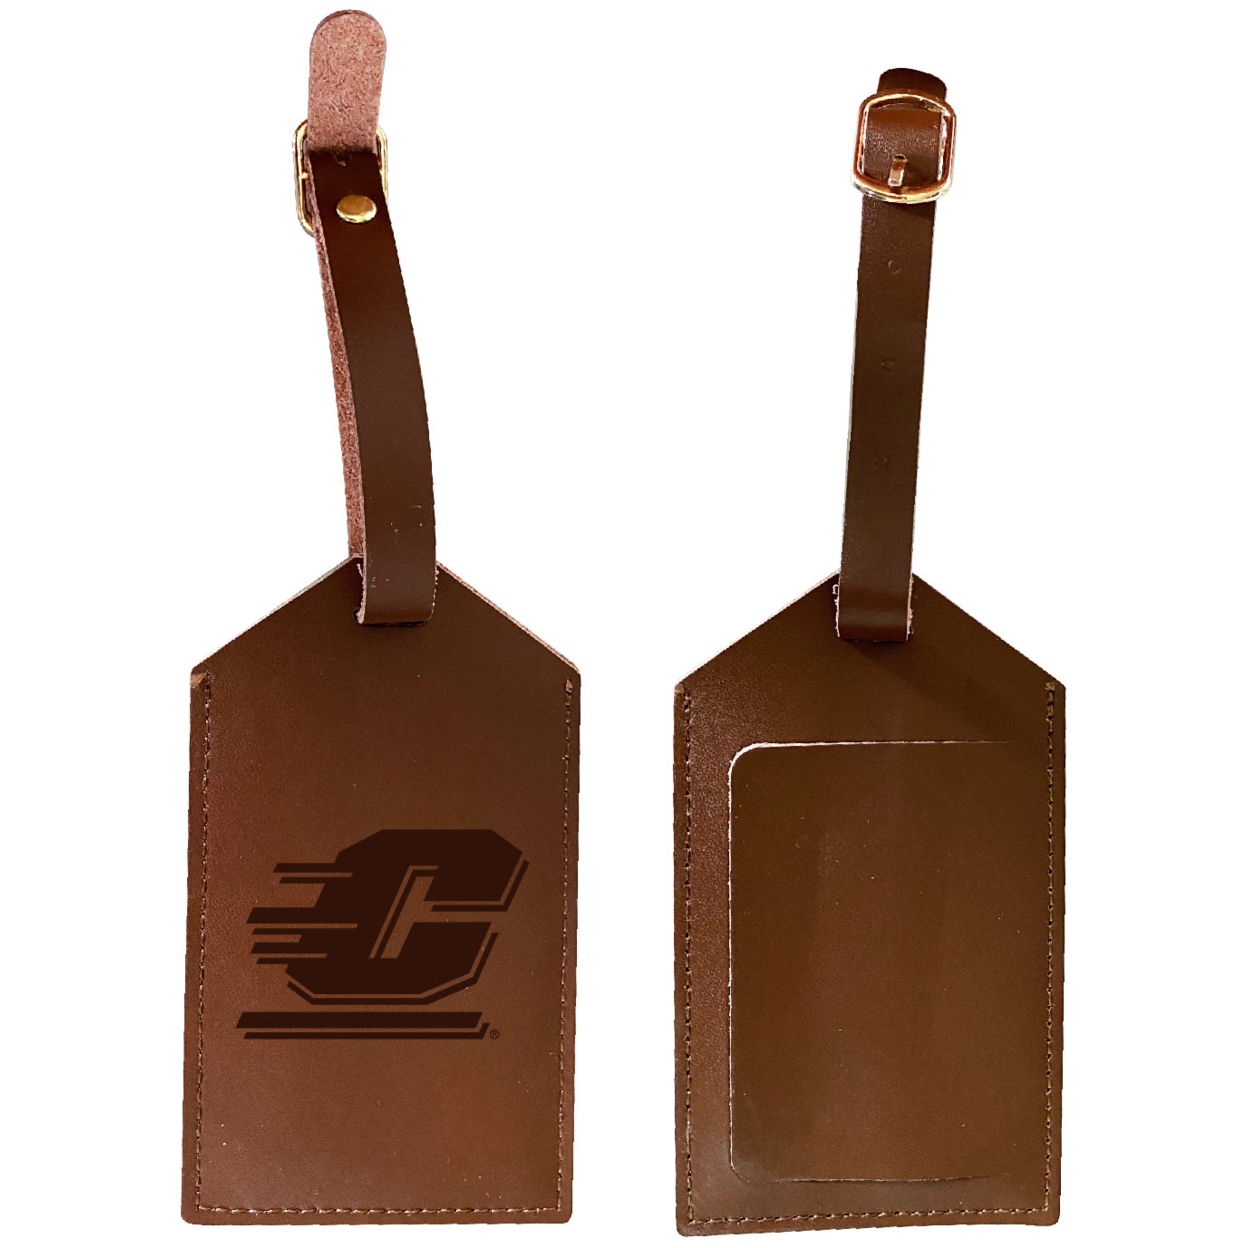 Central Michigan University Leather Luggage Tag Engraved